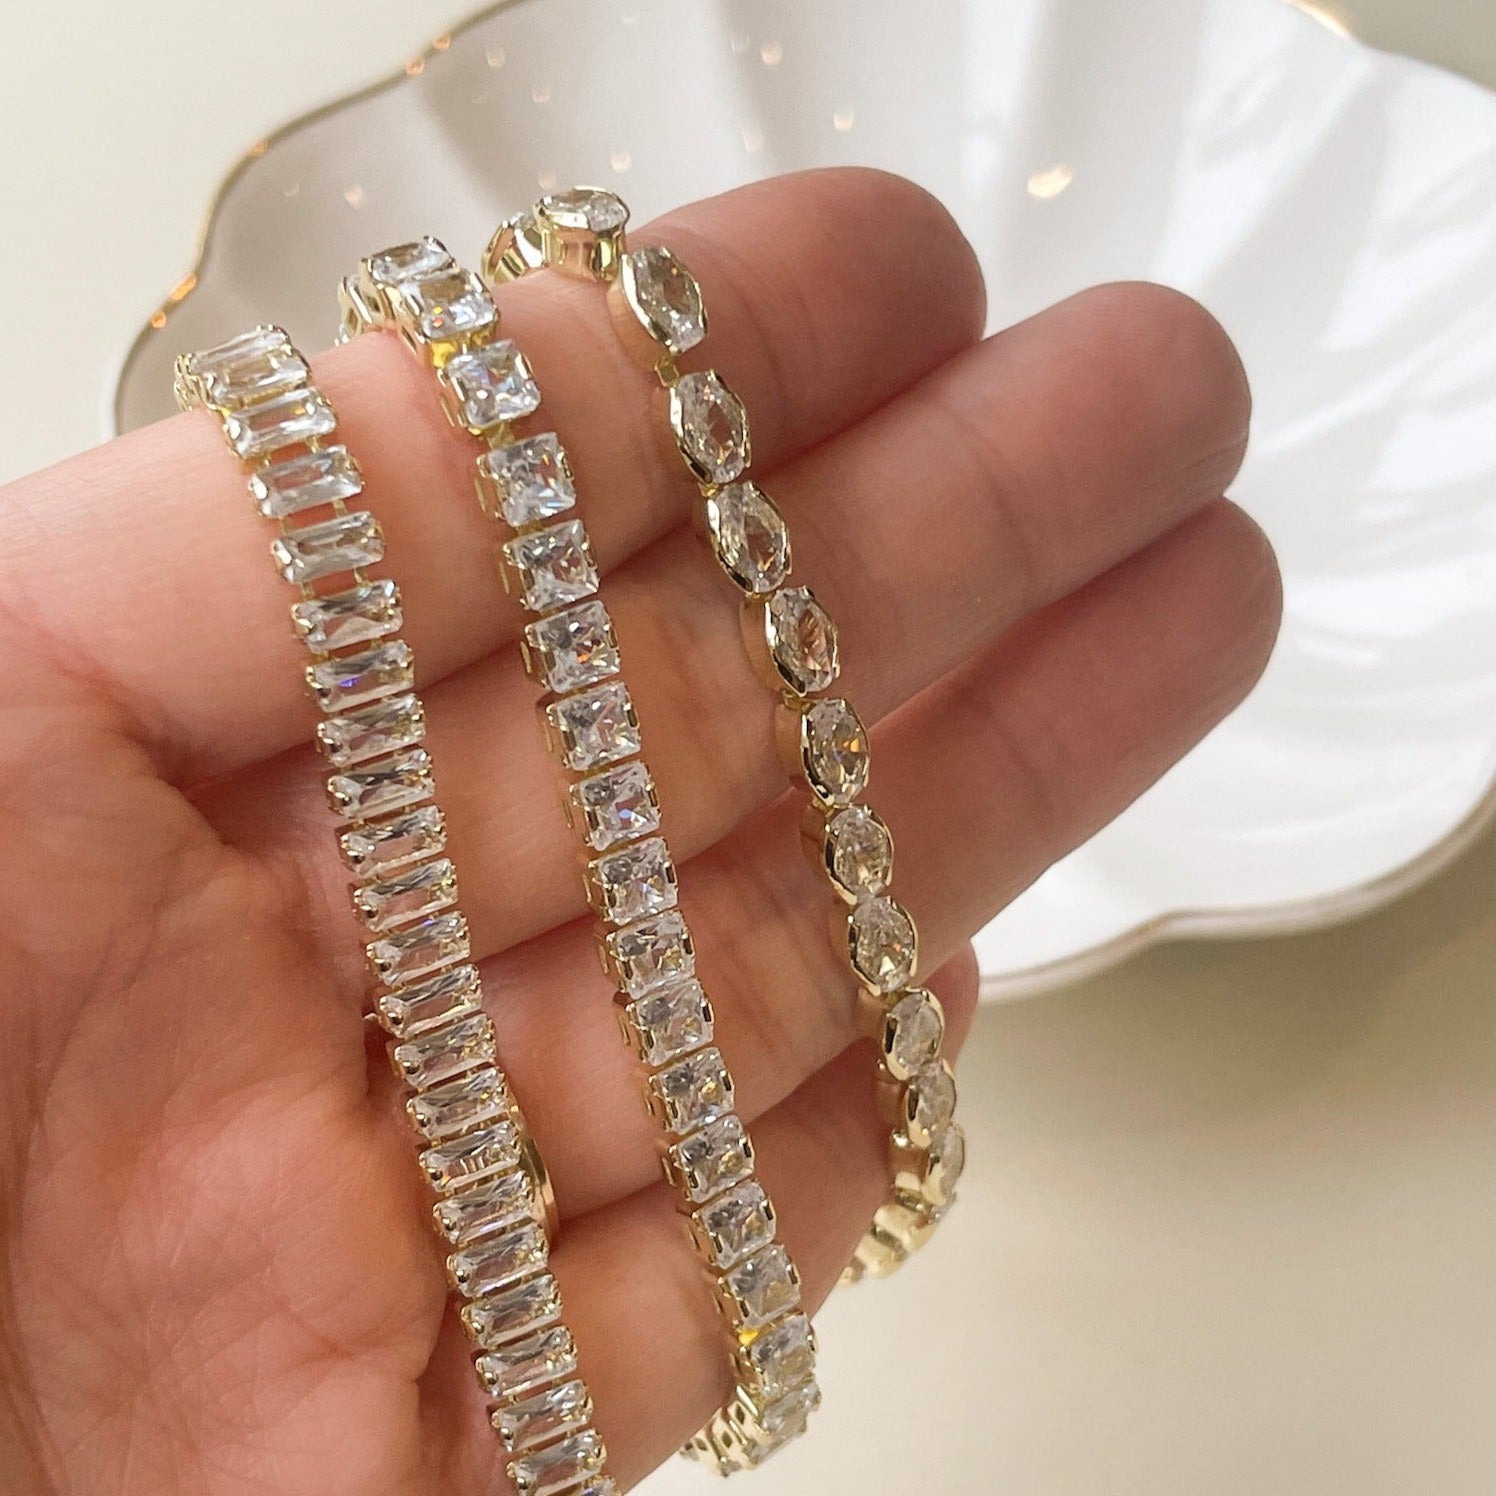 At Auction: 5.00ct Diamond 18ct White Gold Tennis Bracelet. Forty Five  Round Brilliant Cut Diamonds. Comes With a Certificate of Valuation of  $16,390. Bracelet Measures 18.5cm x 4mm. Free Express Delivery With